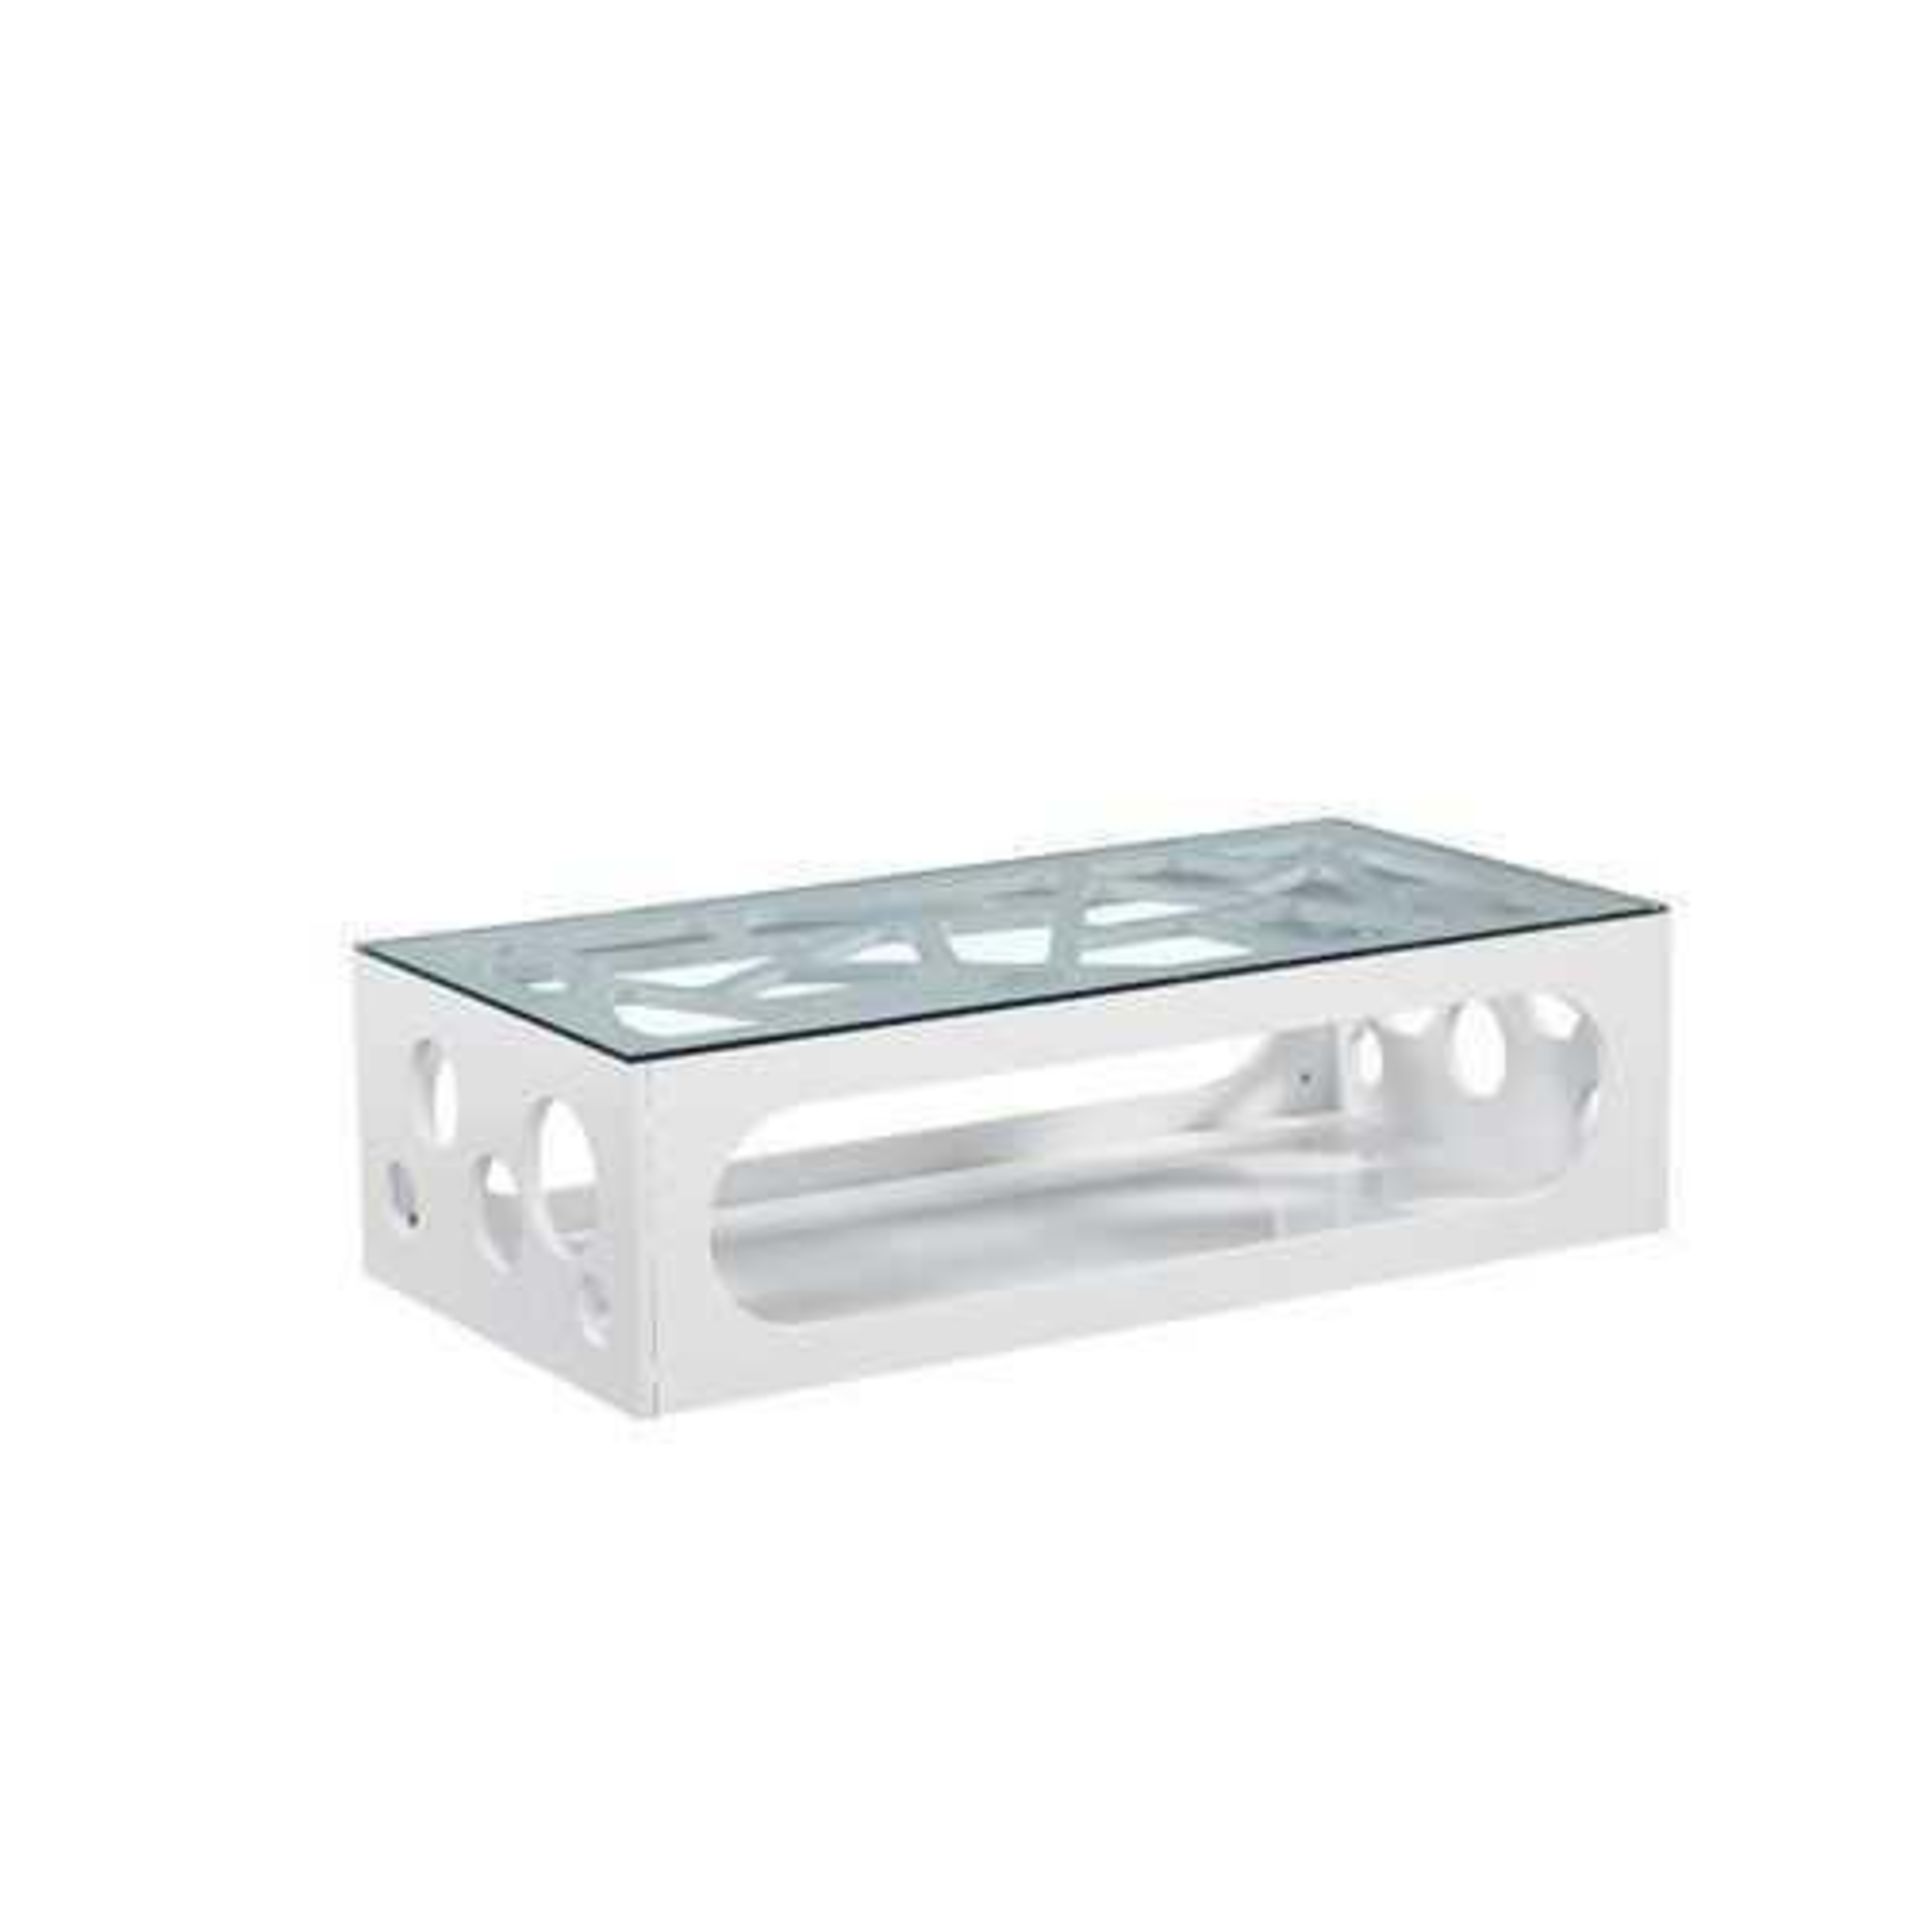 Boxed Mercury Row Wilfred Coffee Table RRP £240 (18992)(Appraisals Available On Request) (Pictures